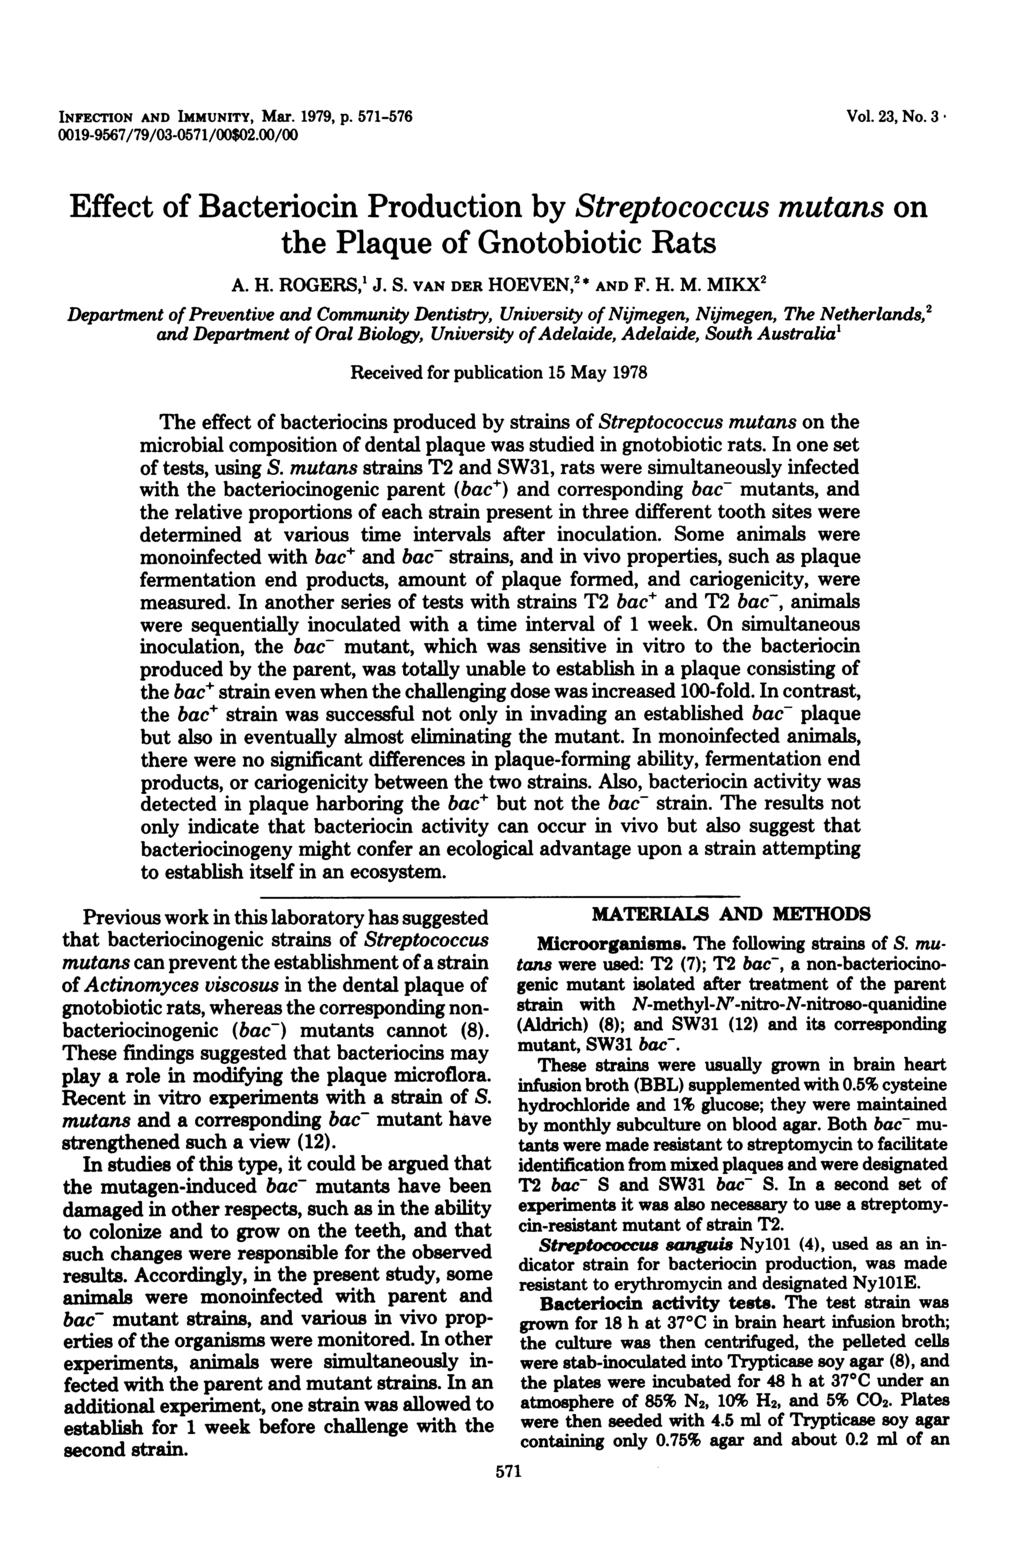 INFECTION AND IMMUNITY, Mar. 1979, p. 571-576 0019-9567/79/03-0571/00$02.00/00 Vol. 23, No. 3 Effect of Bacteriocin Production by Streptococcus mutans on the Plaque of Gnotobiotic Rats A. H.